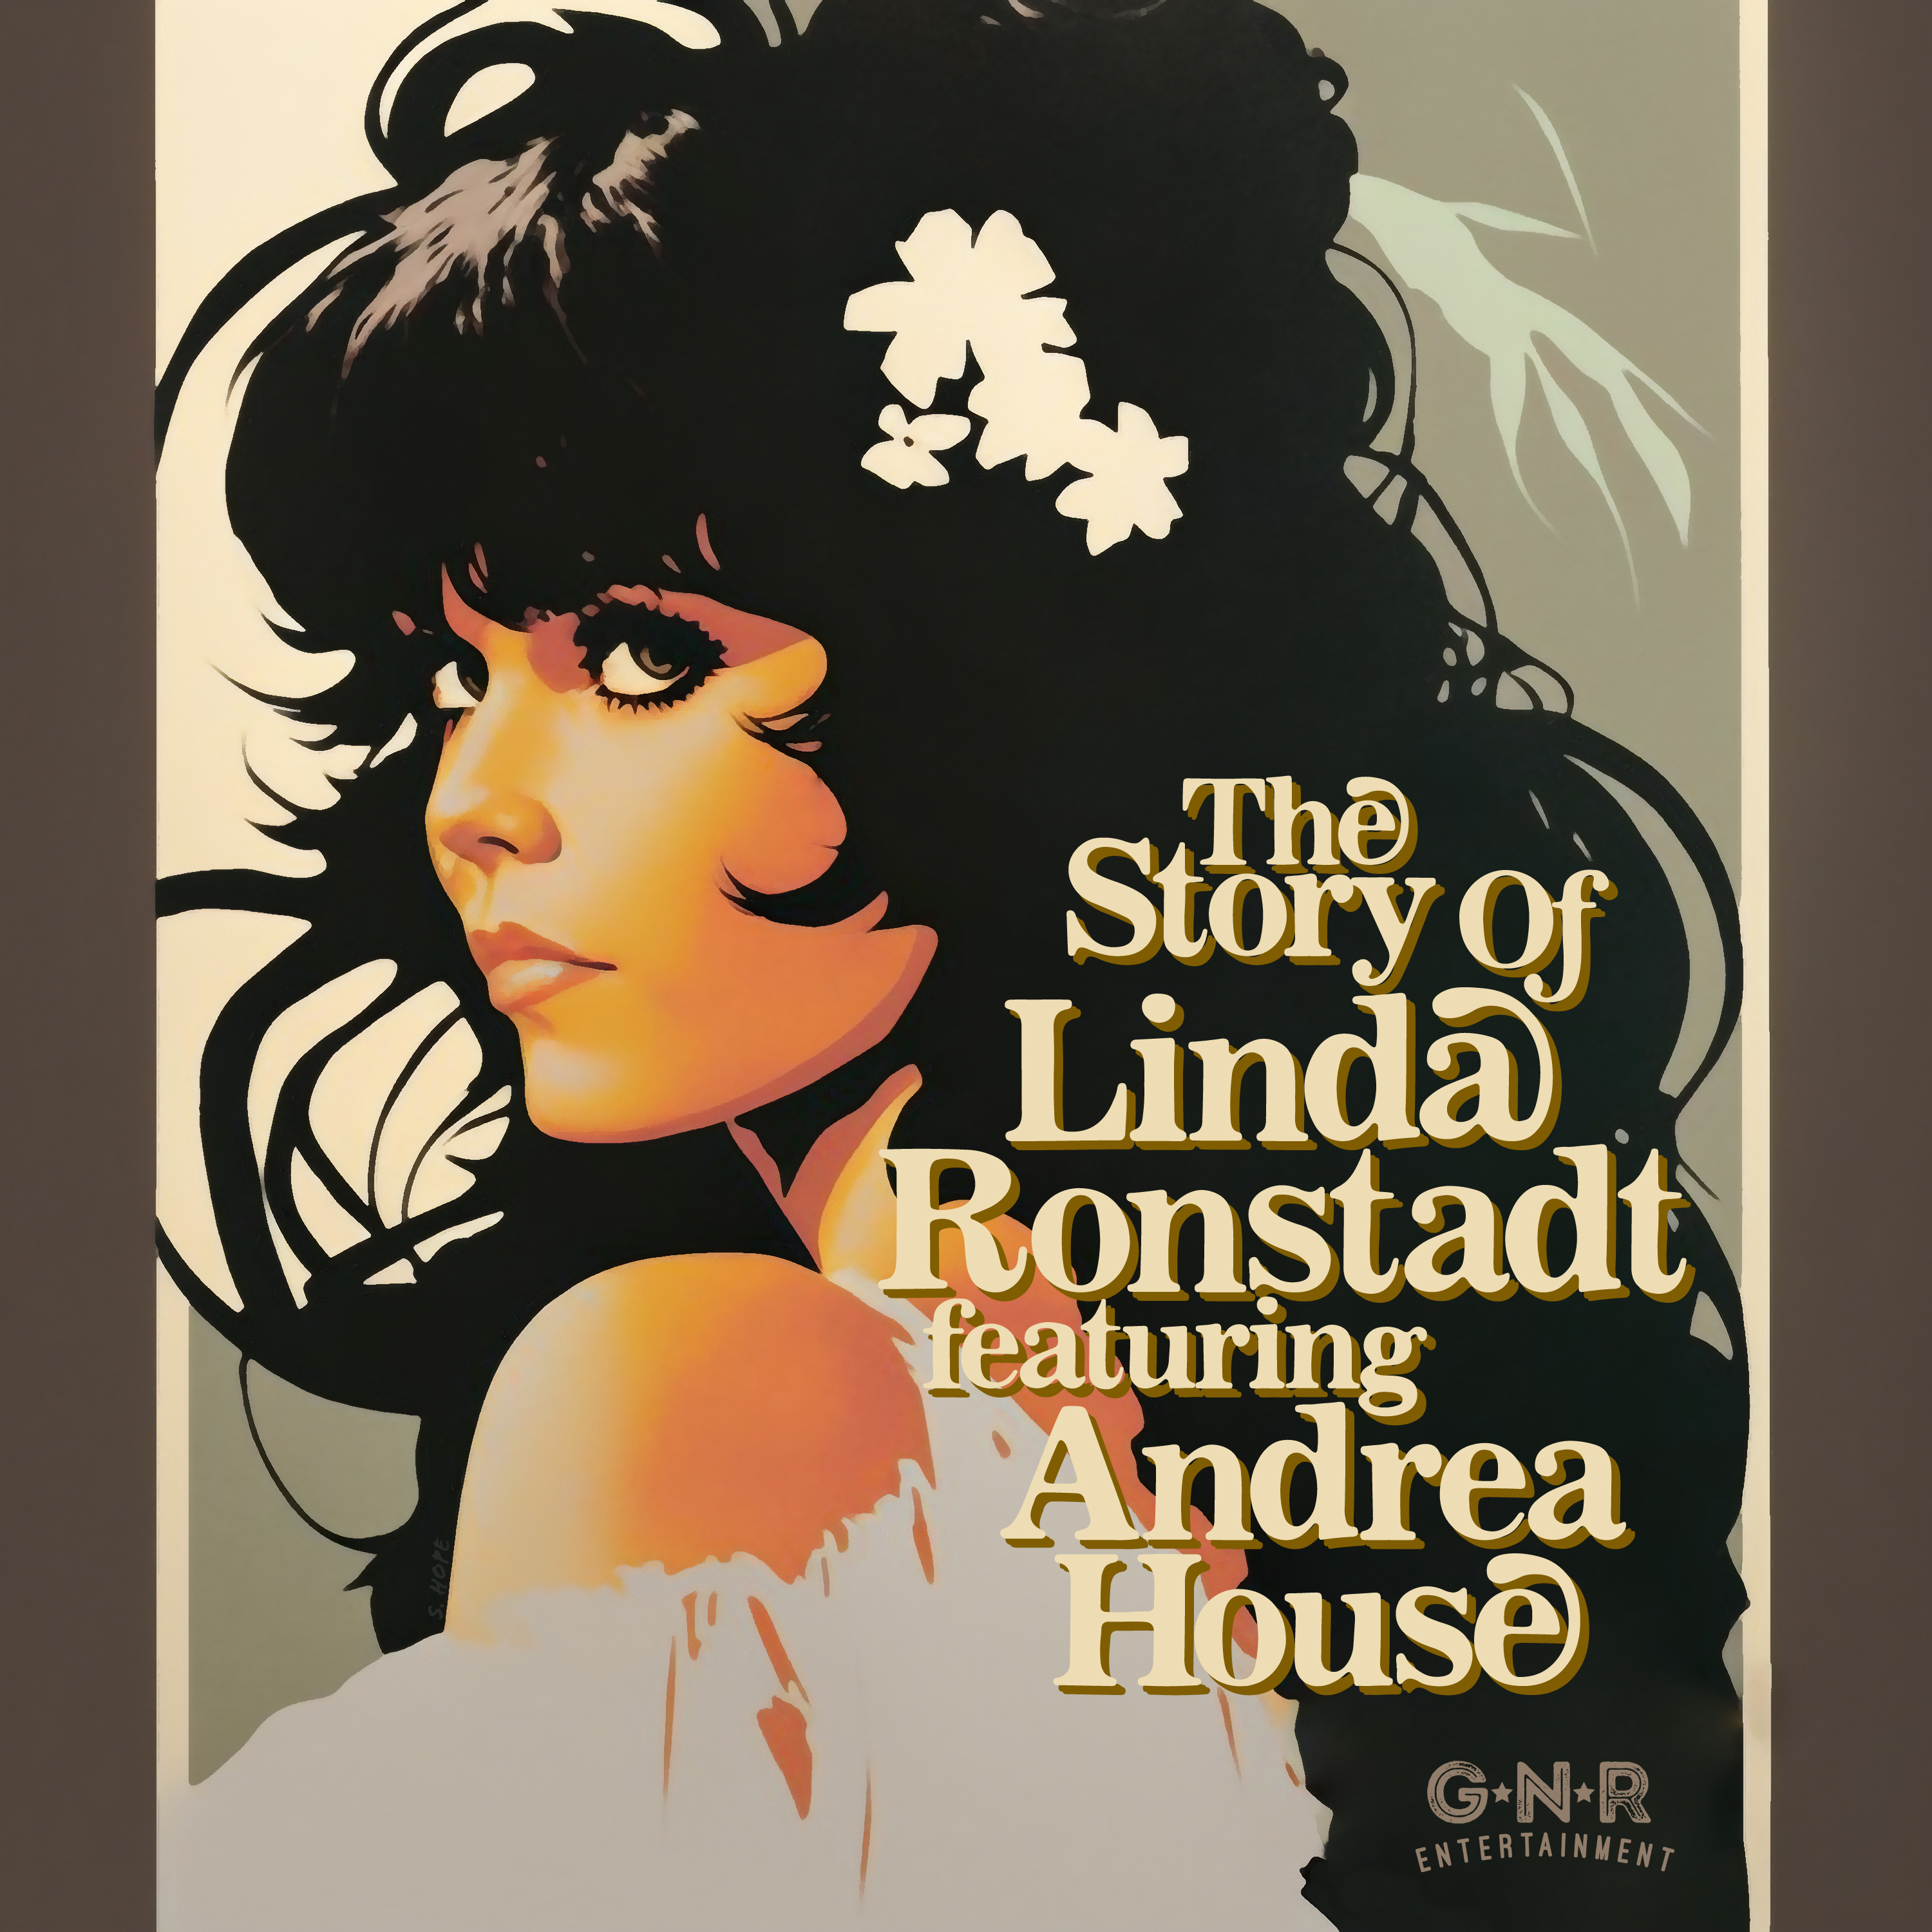  The Story of Linda Ronstadt Featuring Andrea House 